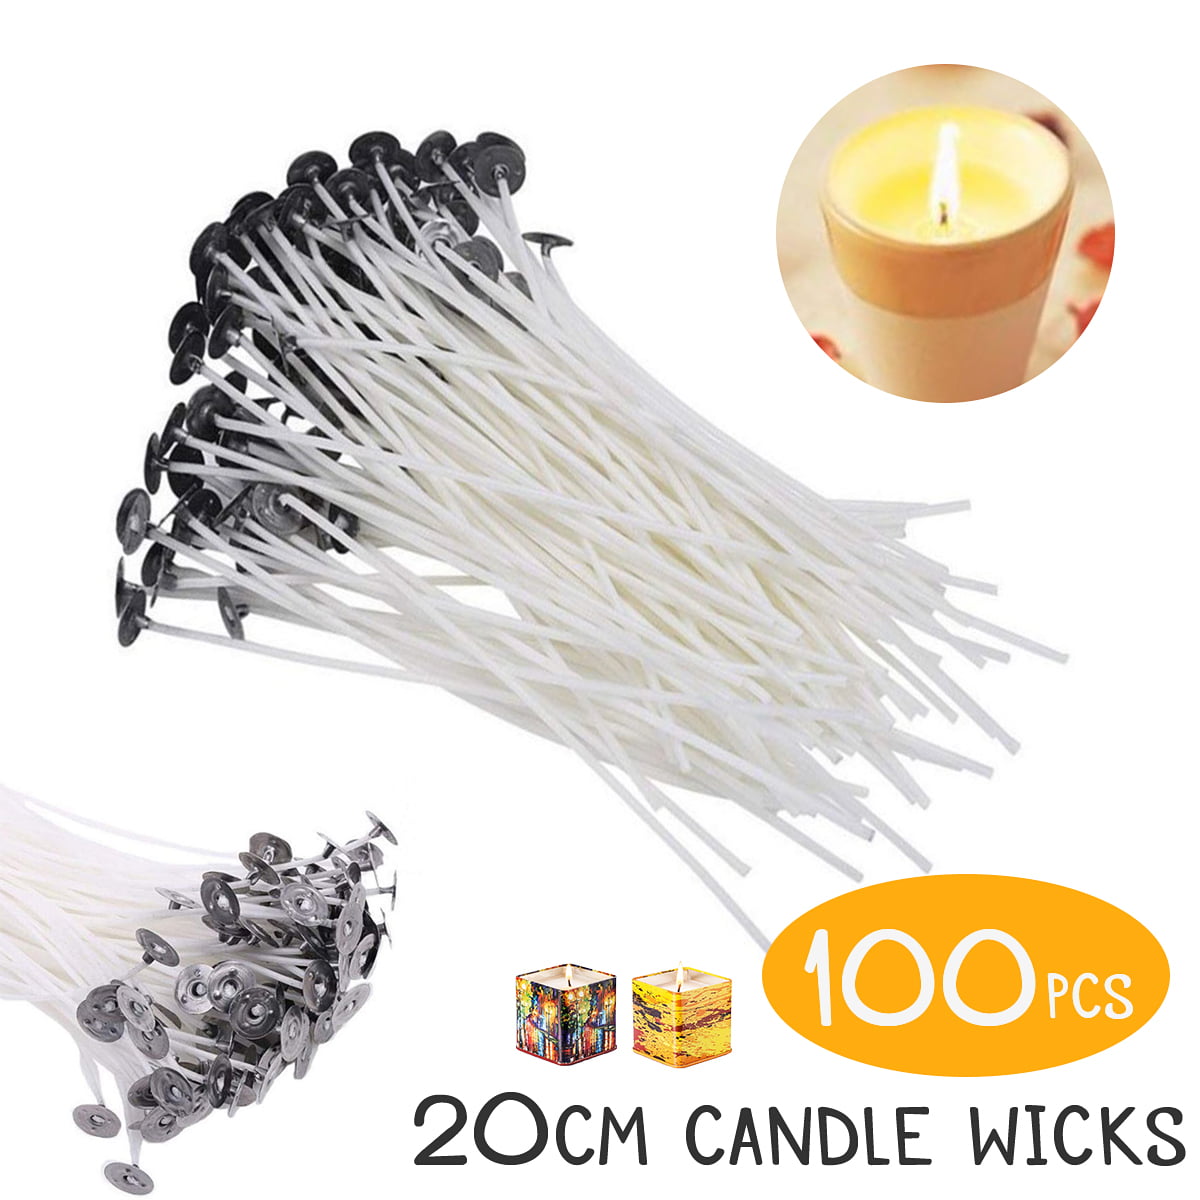 30/100Pcs Candle Wicks Cotton Core Waxed With Sustainers For Candle Making 